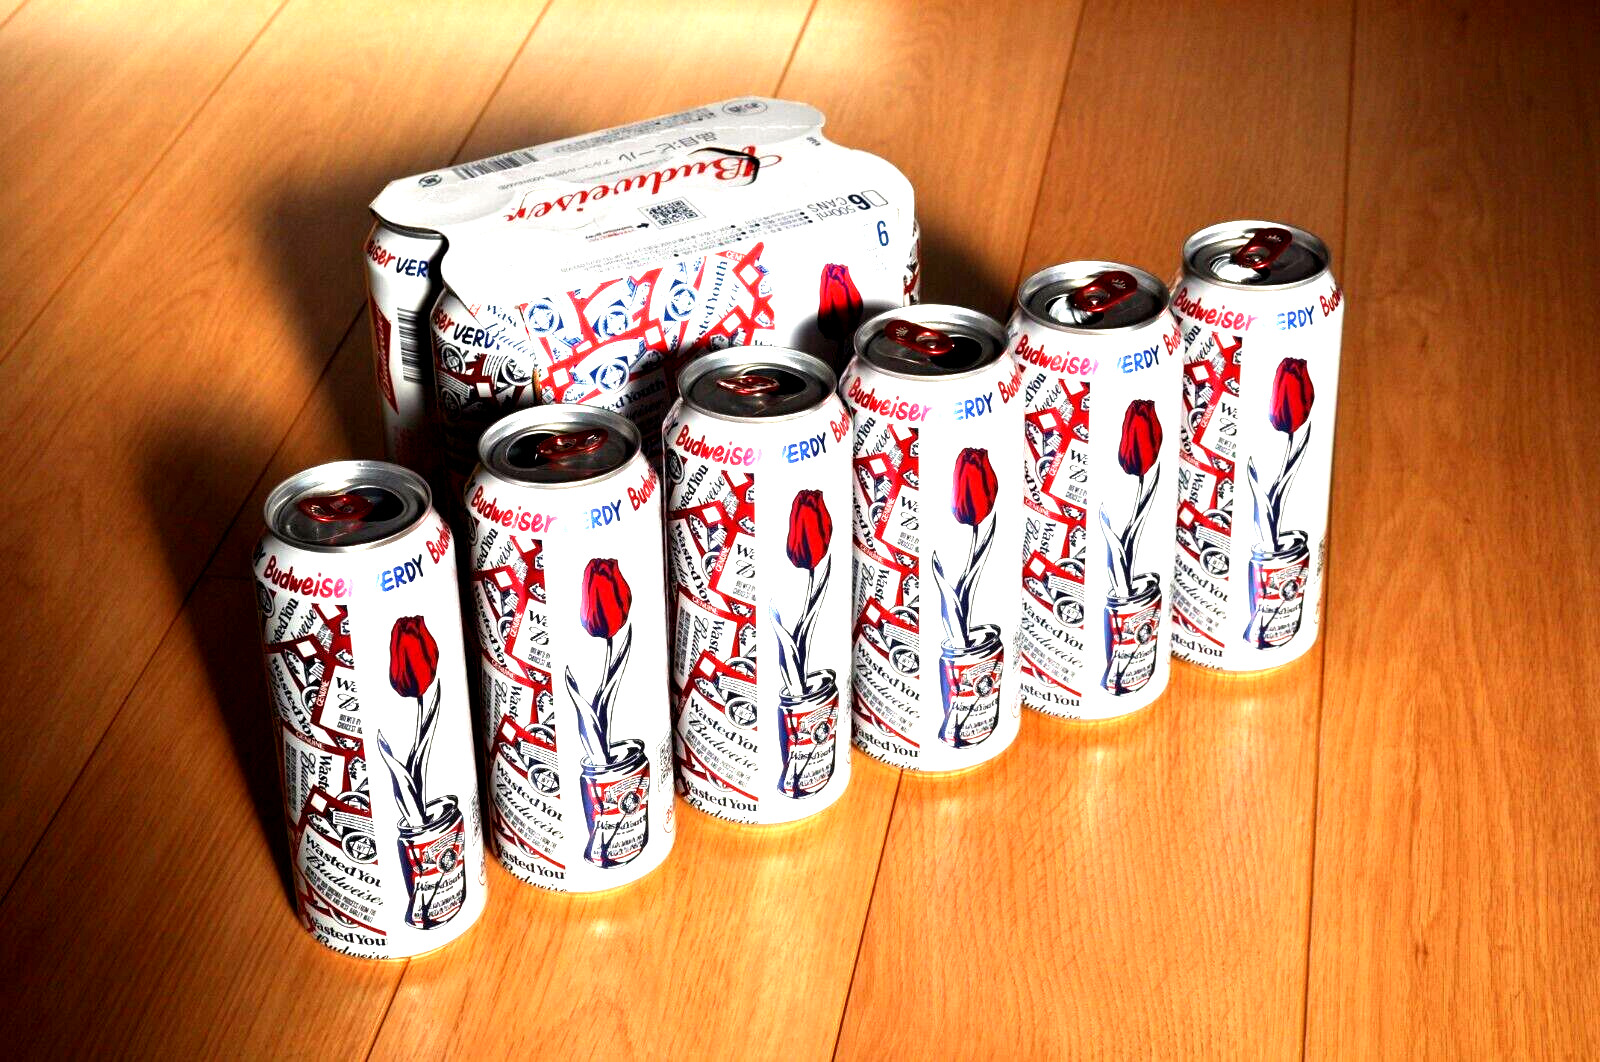 Empty Can Budweiser VERDY BEER 500ml. 6 pie. set with package from Japan arigato